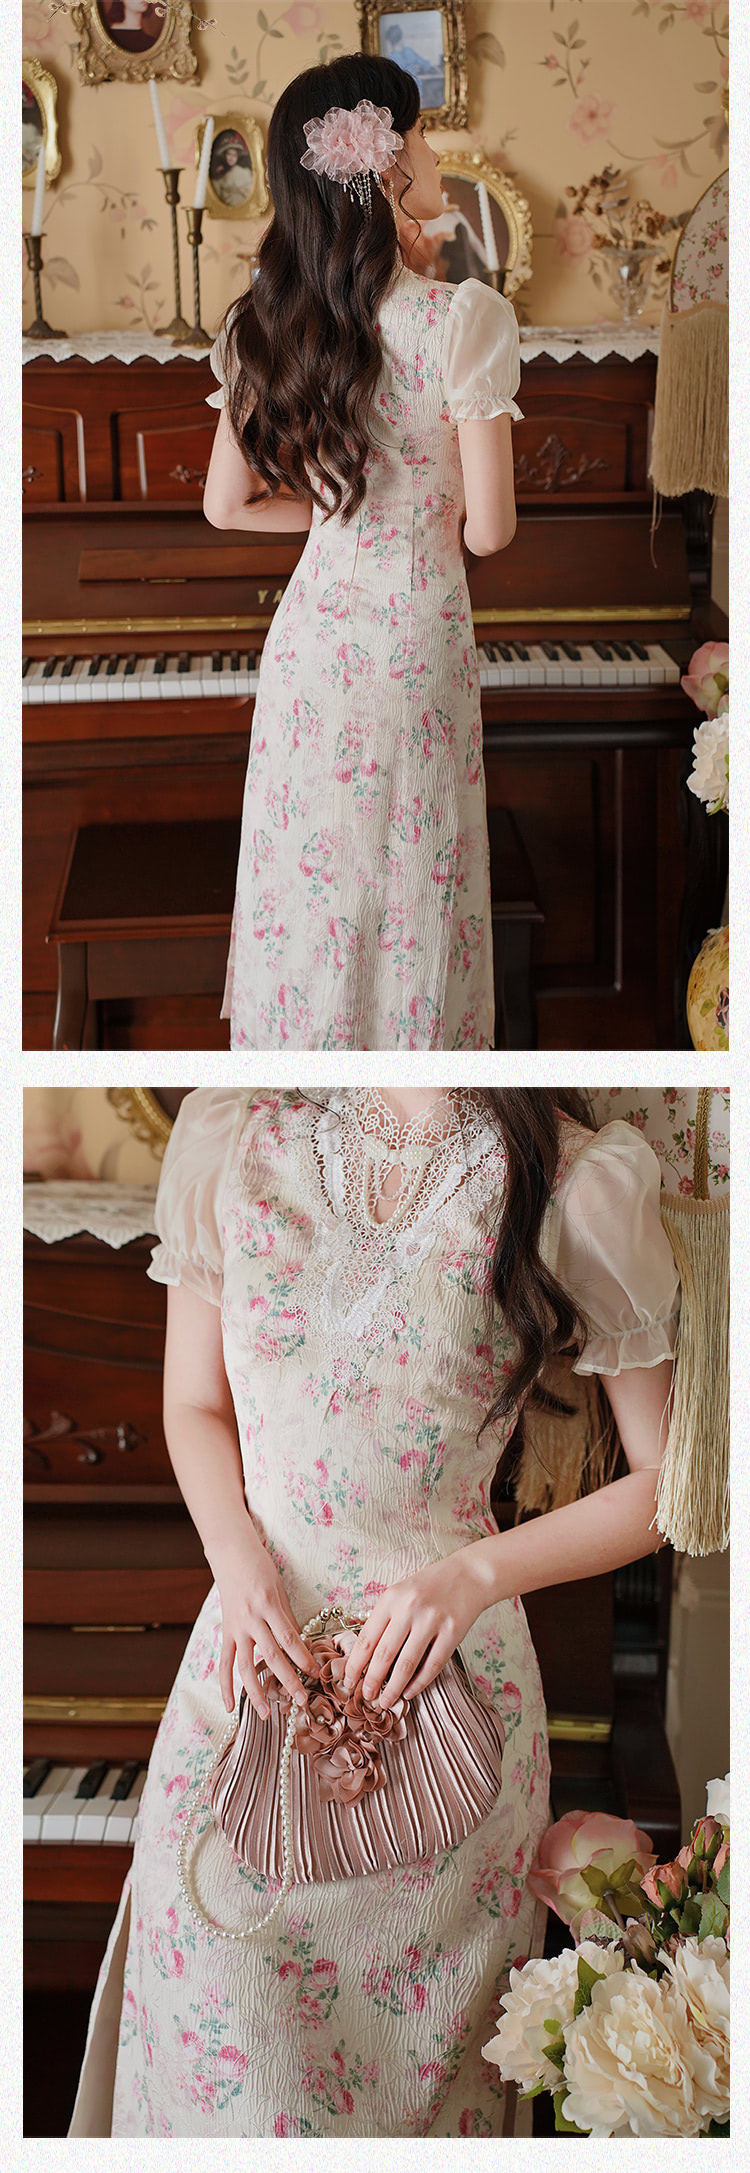 Aesthetic-Baroque-Rose-Floral-Casual-Dress-Daily-Work-Dating-Outfits13